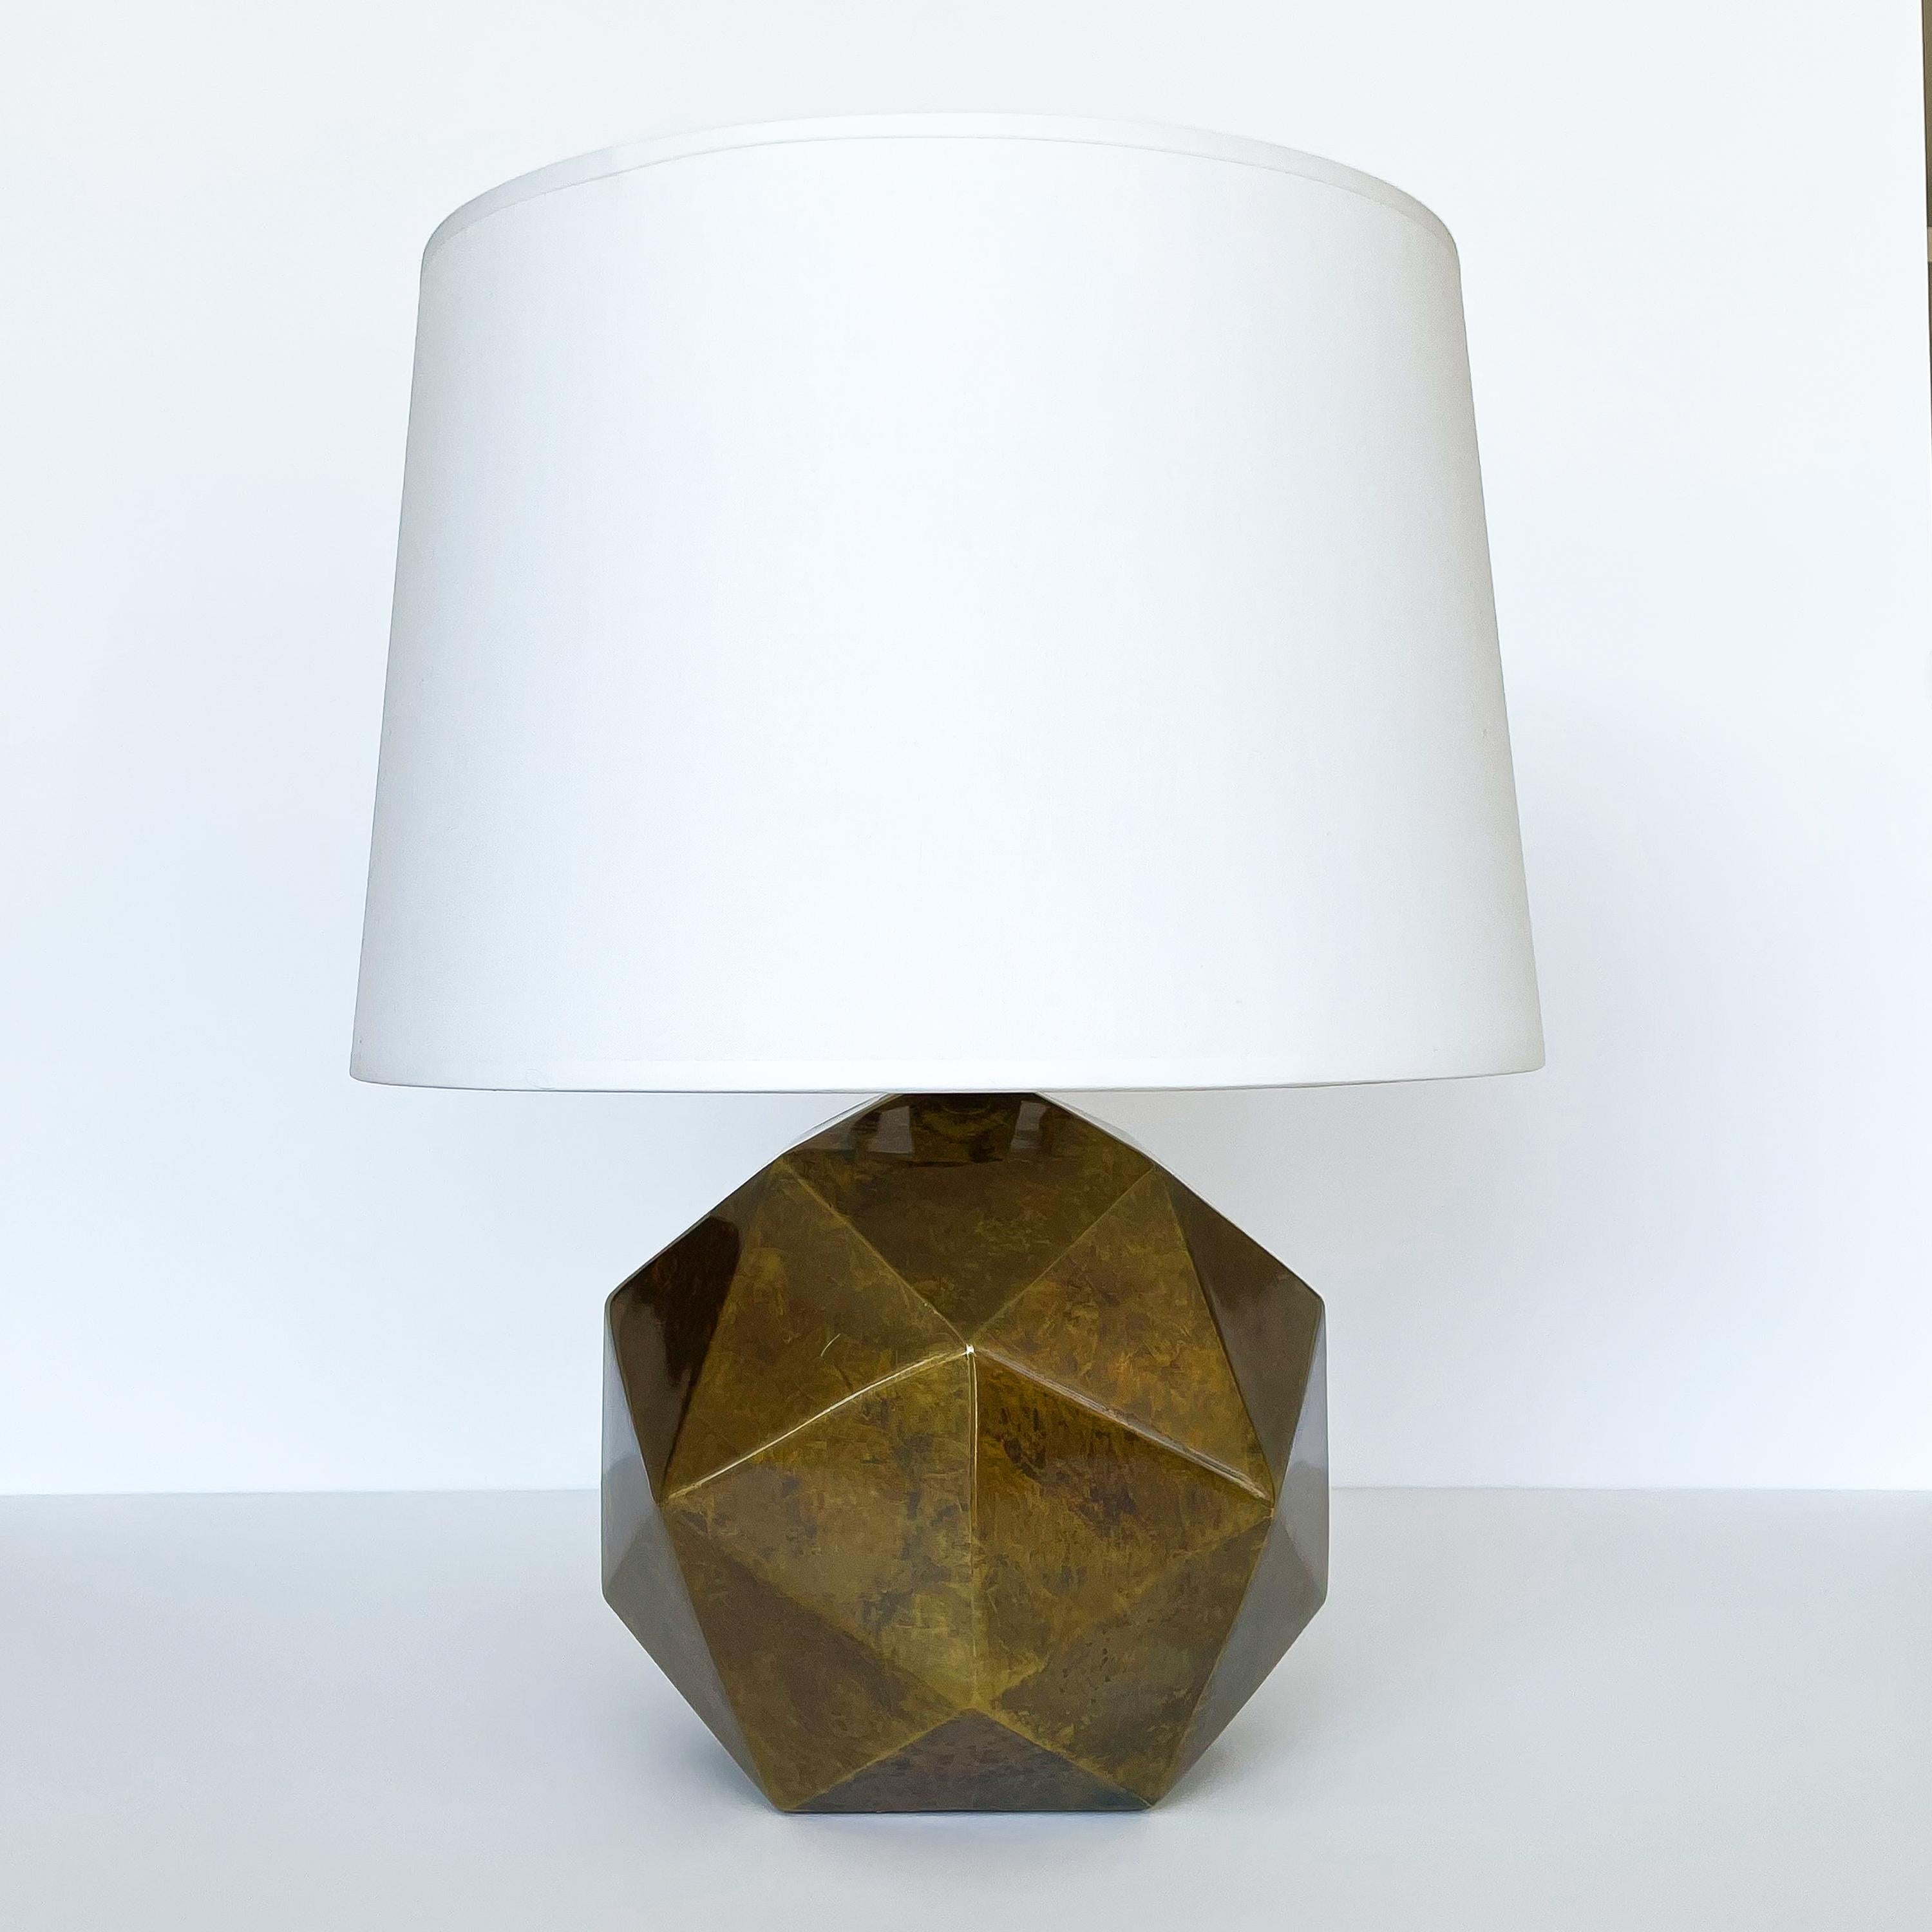 Westwood Industries antique bronze faceted geometric table lamp, circa 1978. Geodesic form with antique bronze finish. Brass harp and solid brass cylinder finial. Takes one standard base light bulb. Working condition. Sold sans shade. Very good